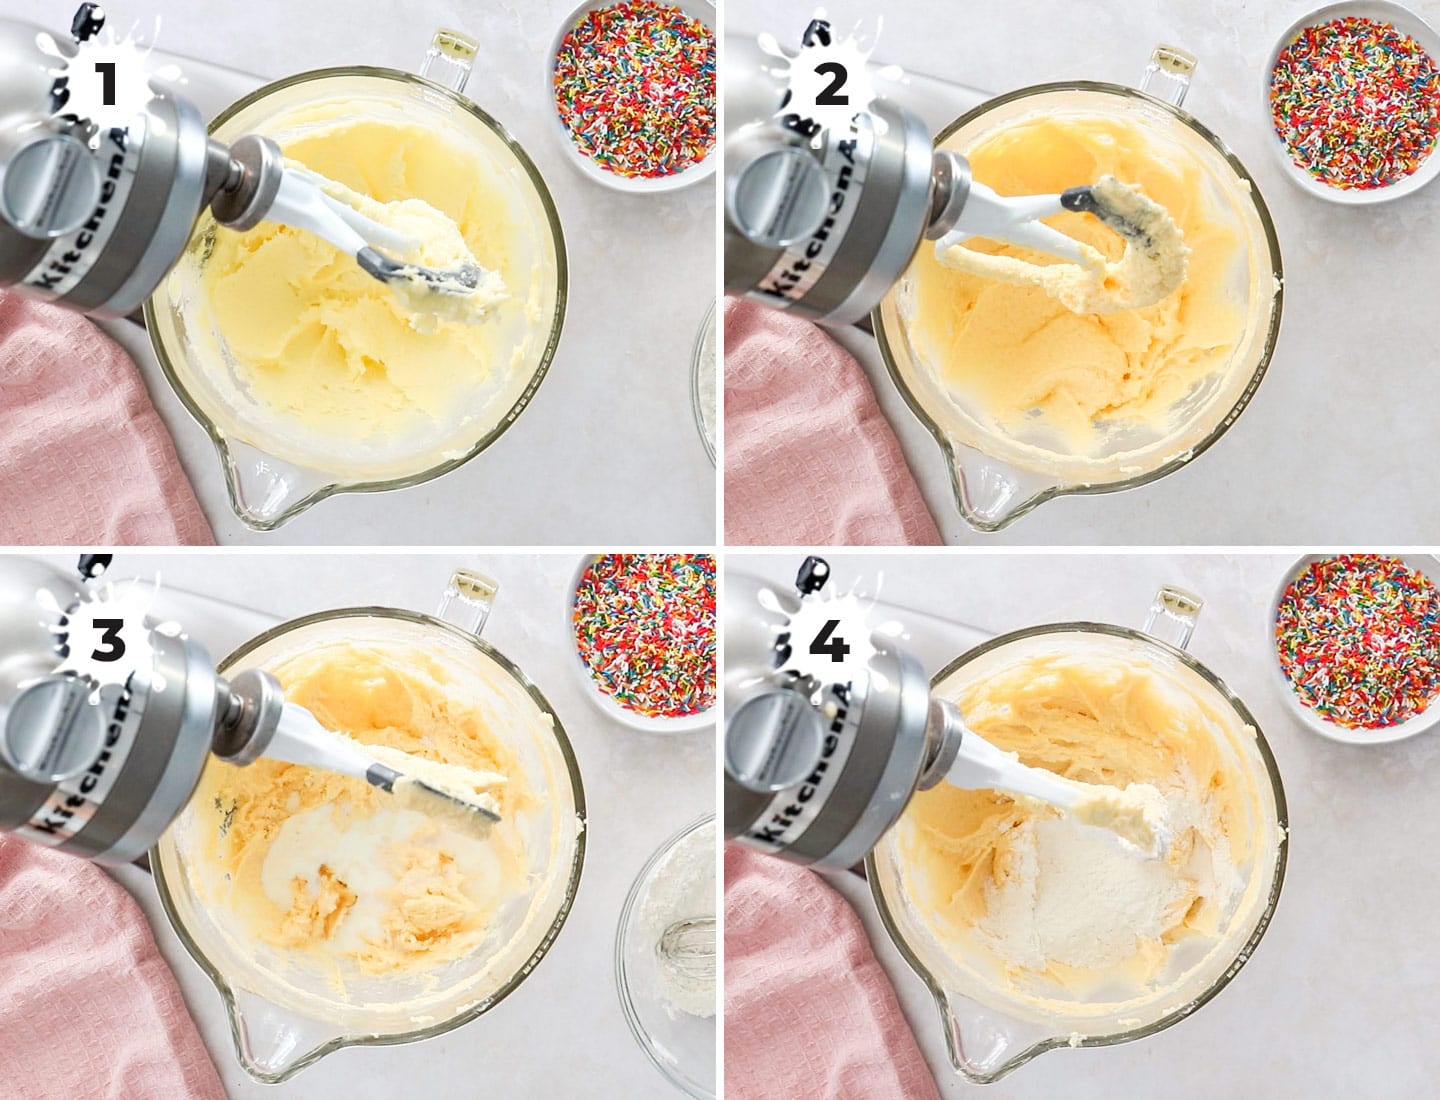 A collage of 4 images showing how to make the cake batter.